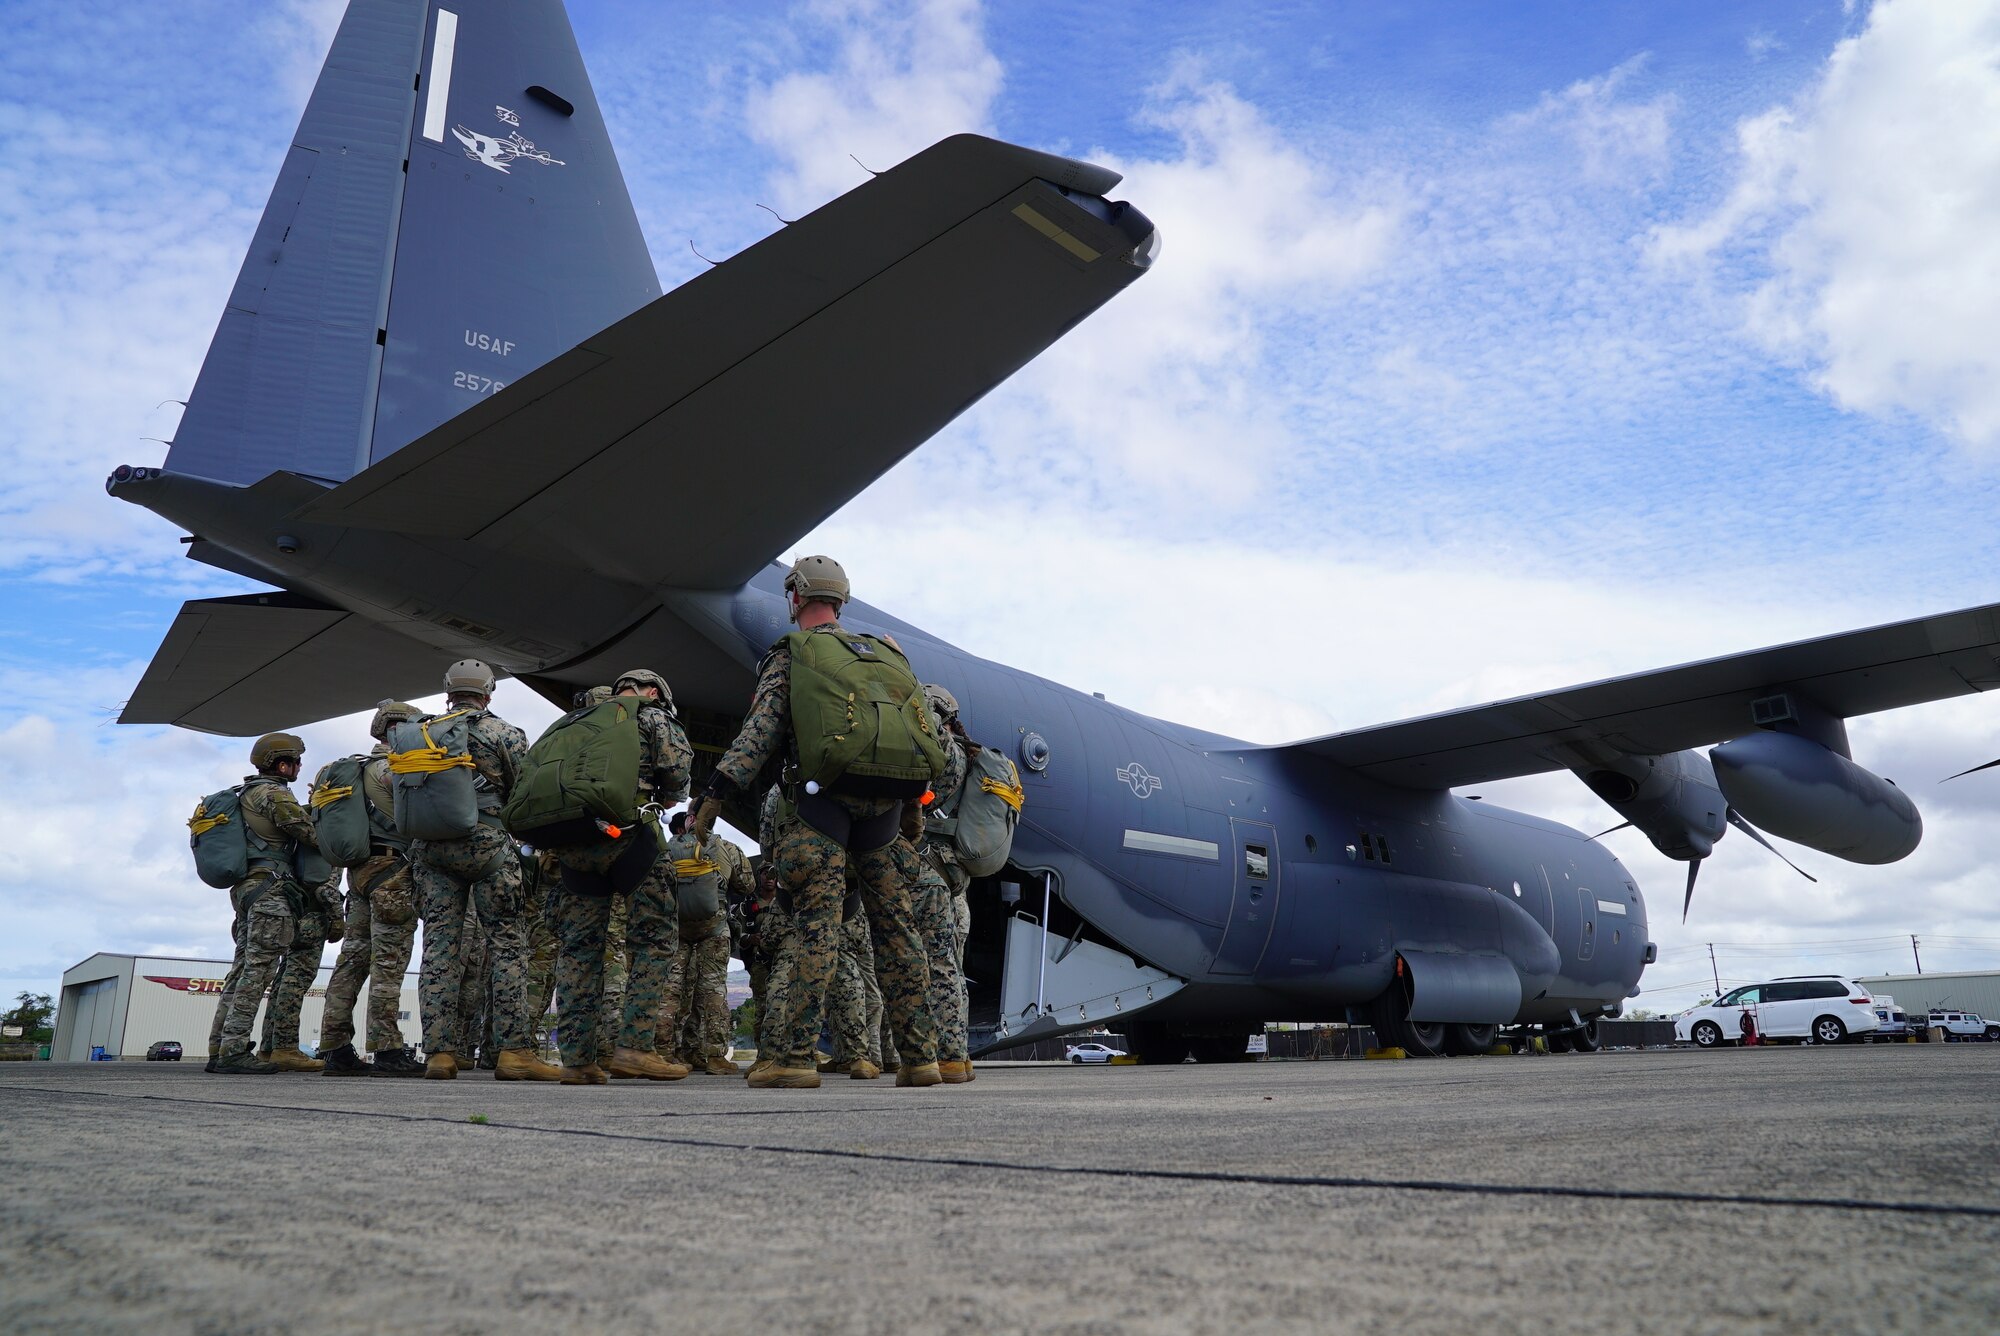 A team of Marines, Soldiers, and Airmen board an MC-130J Air Commando II assigned to the 353rd Special Operations Wing